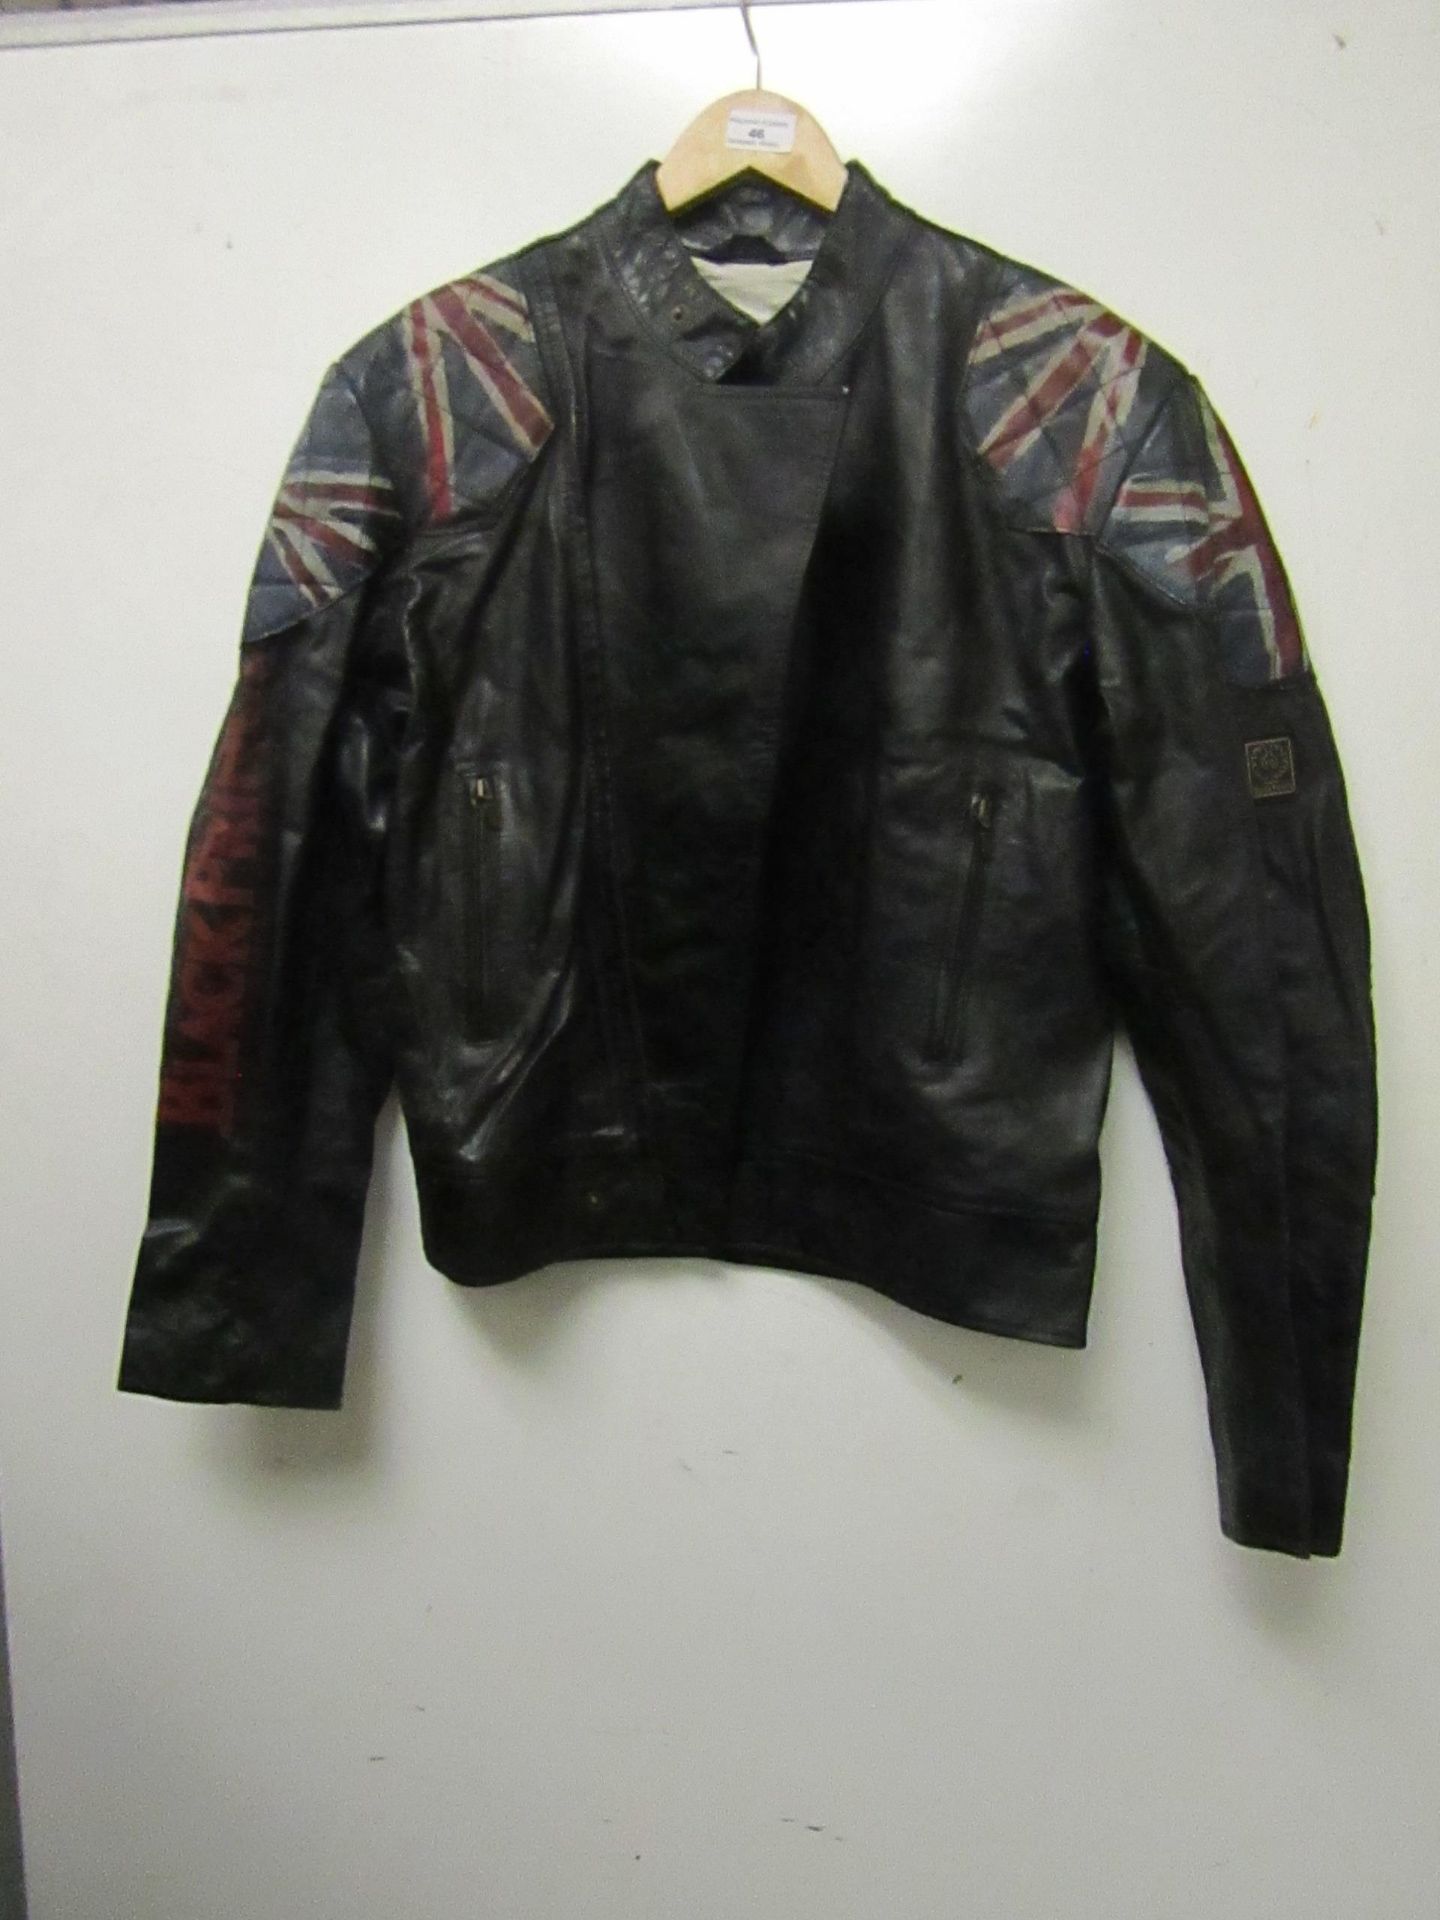 Polo Ralph Lauren A2 bomber jacket leather, size 40, with tags.